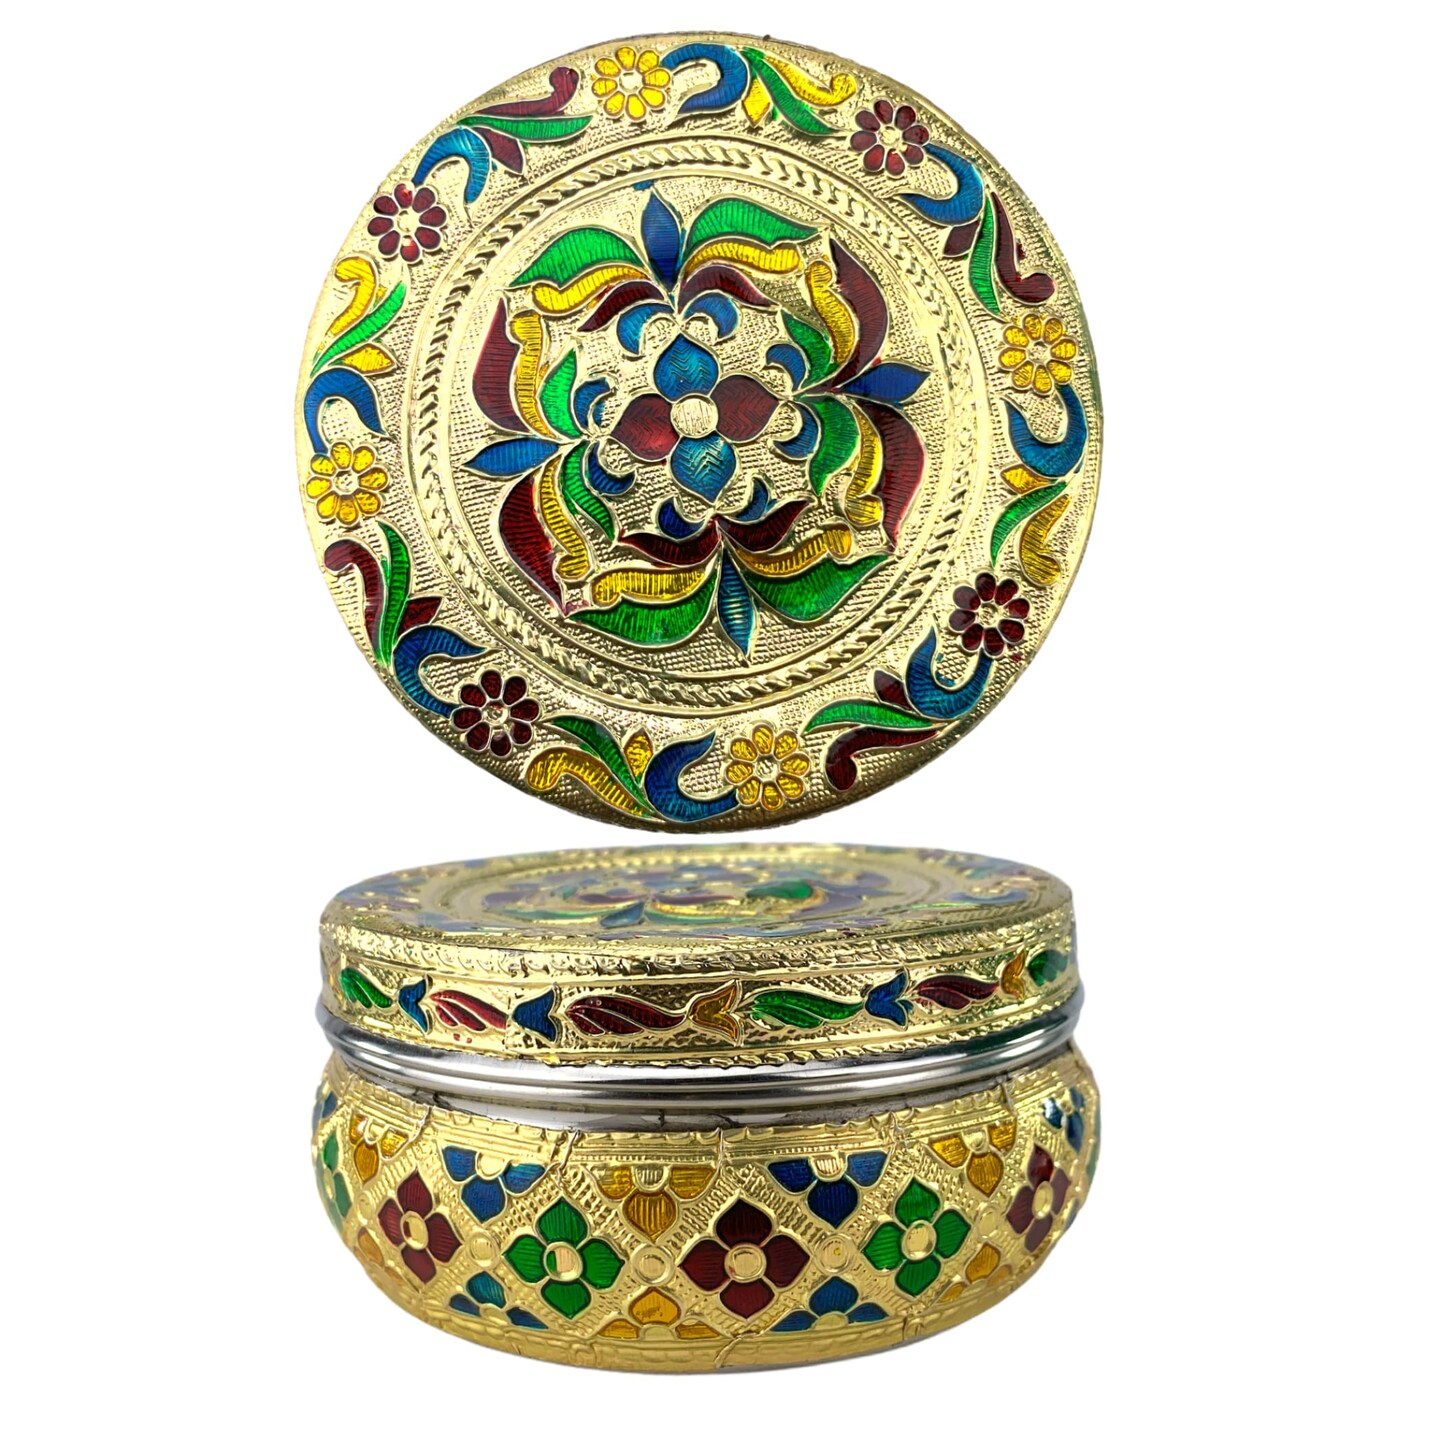 4ct Decorative Sweet Box Stainless Steel Small Round Storage Box Meenakari Container Laddu Box Spice Storage Unique Multipurpose Use Box Gift For Guest